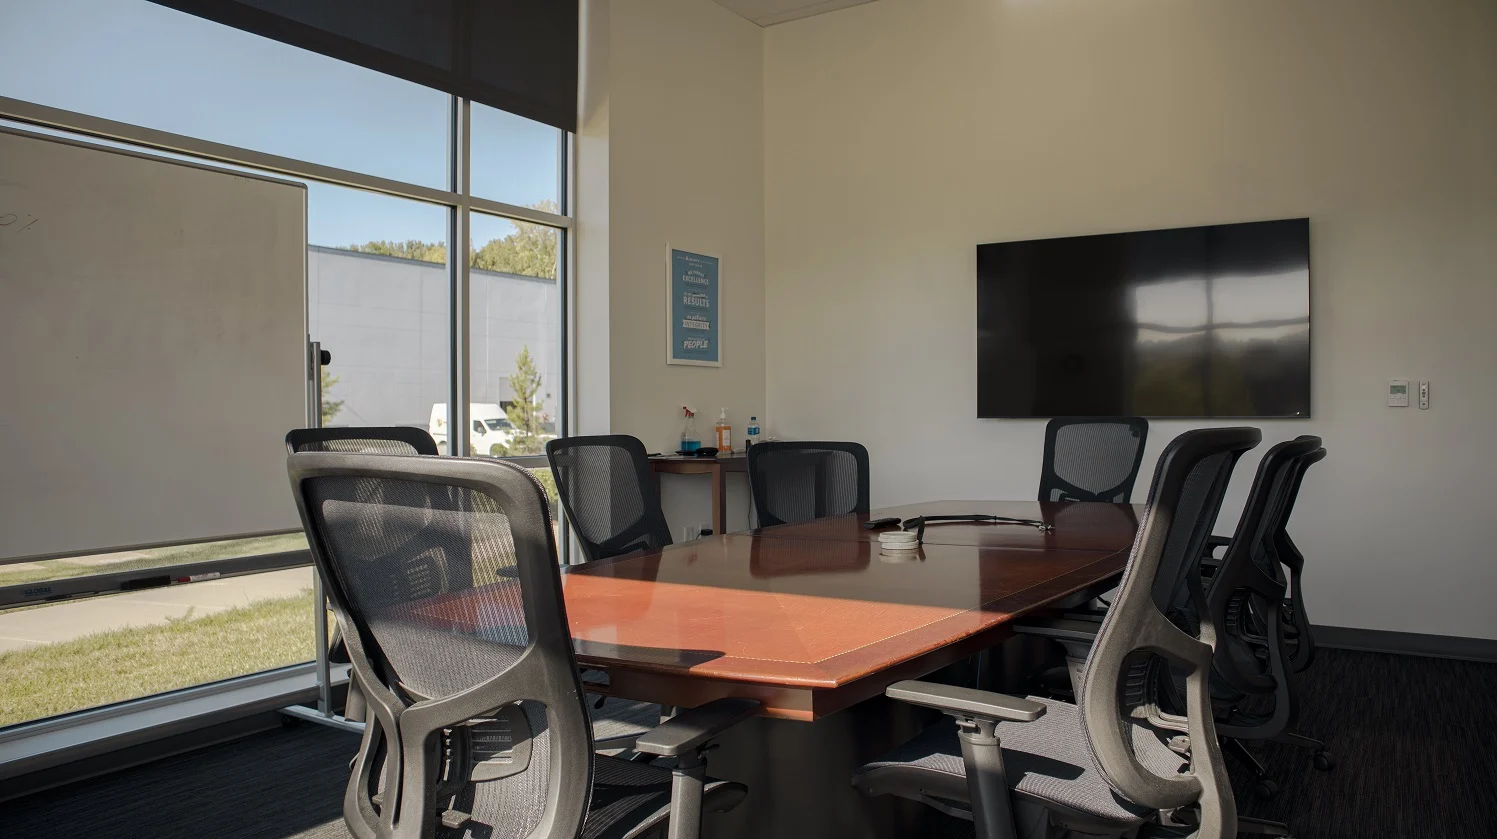 THE SET Large - a sleek looking conference room designed for 2-5 person spaces.